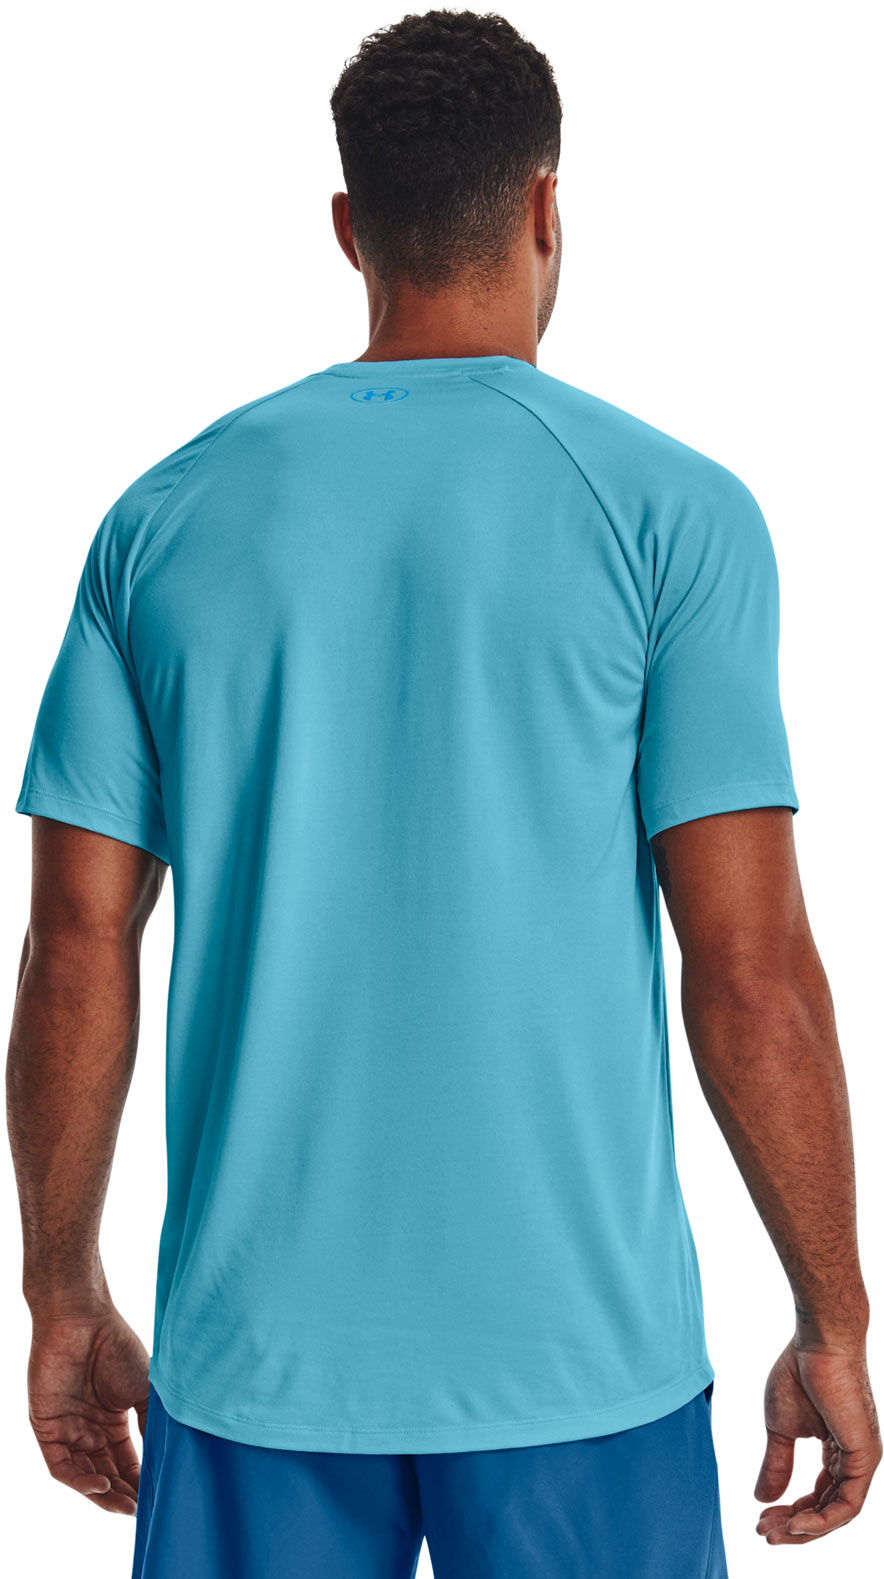 Men’s T-shirt with short sleeves